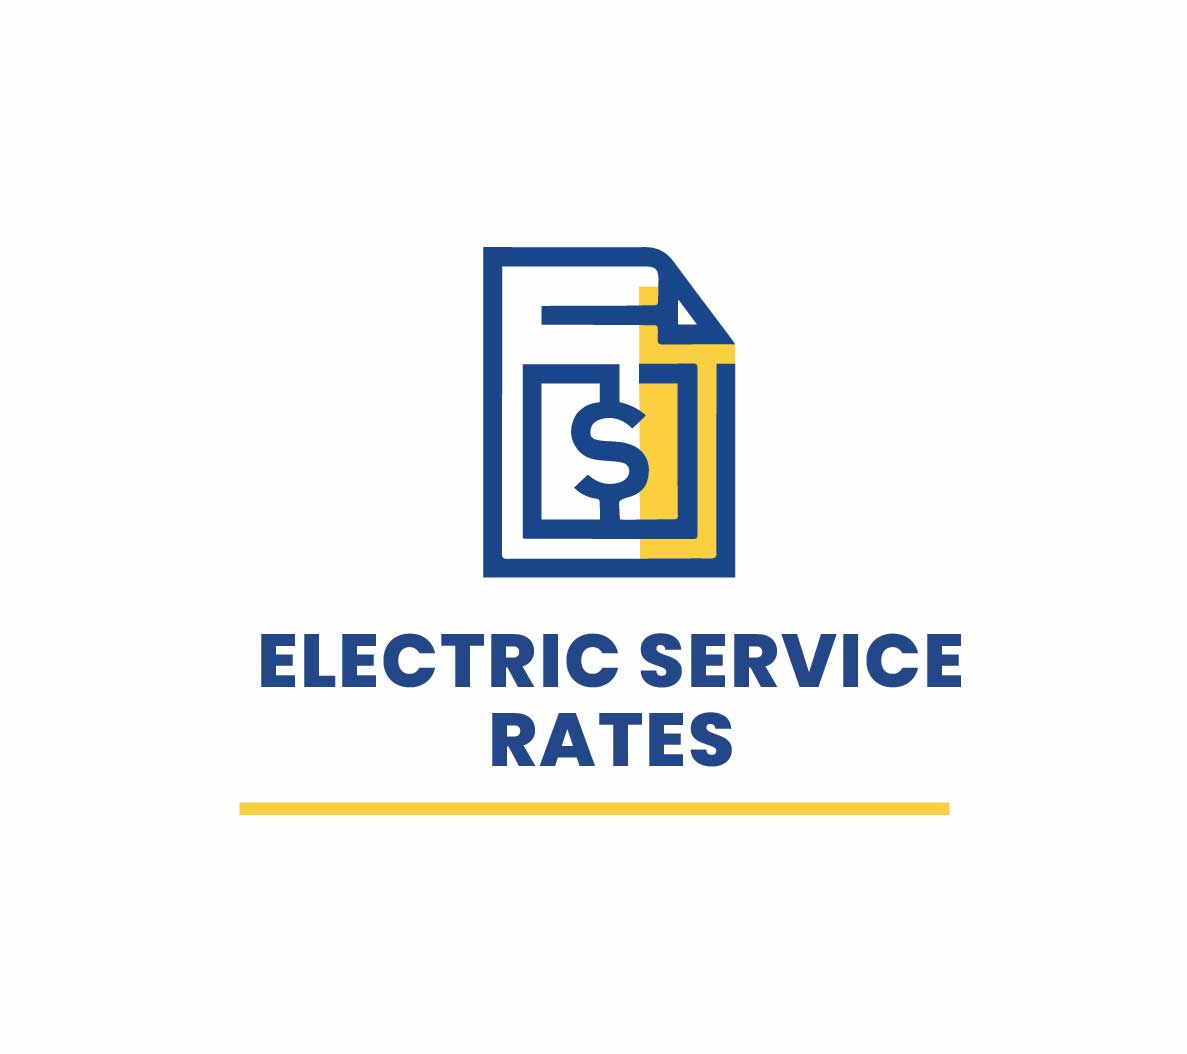 Click here to request electric service rates